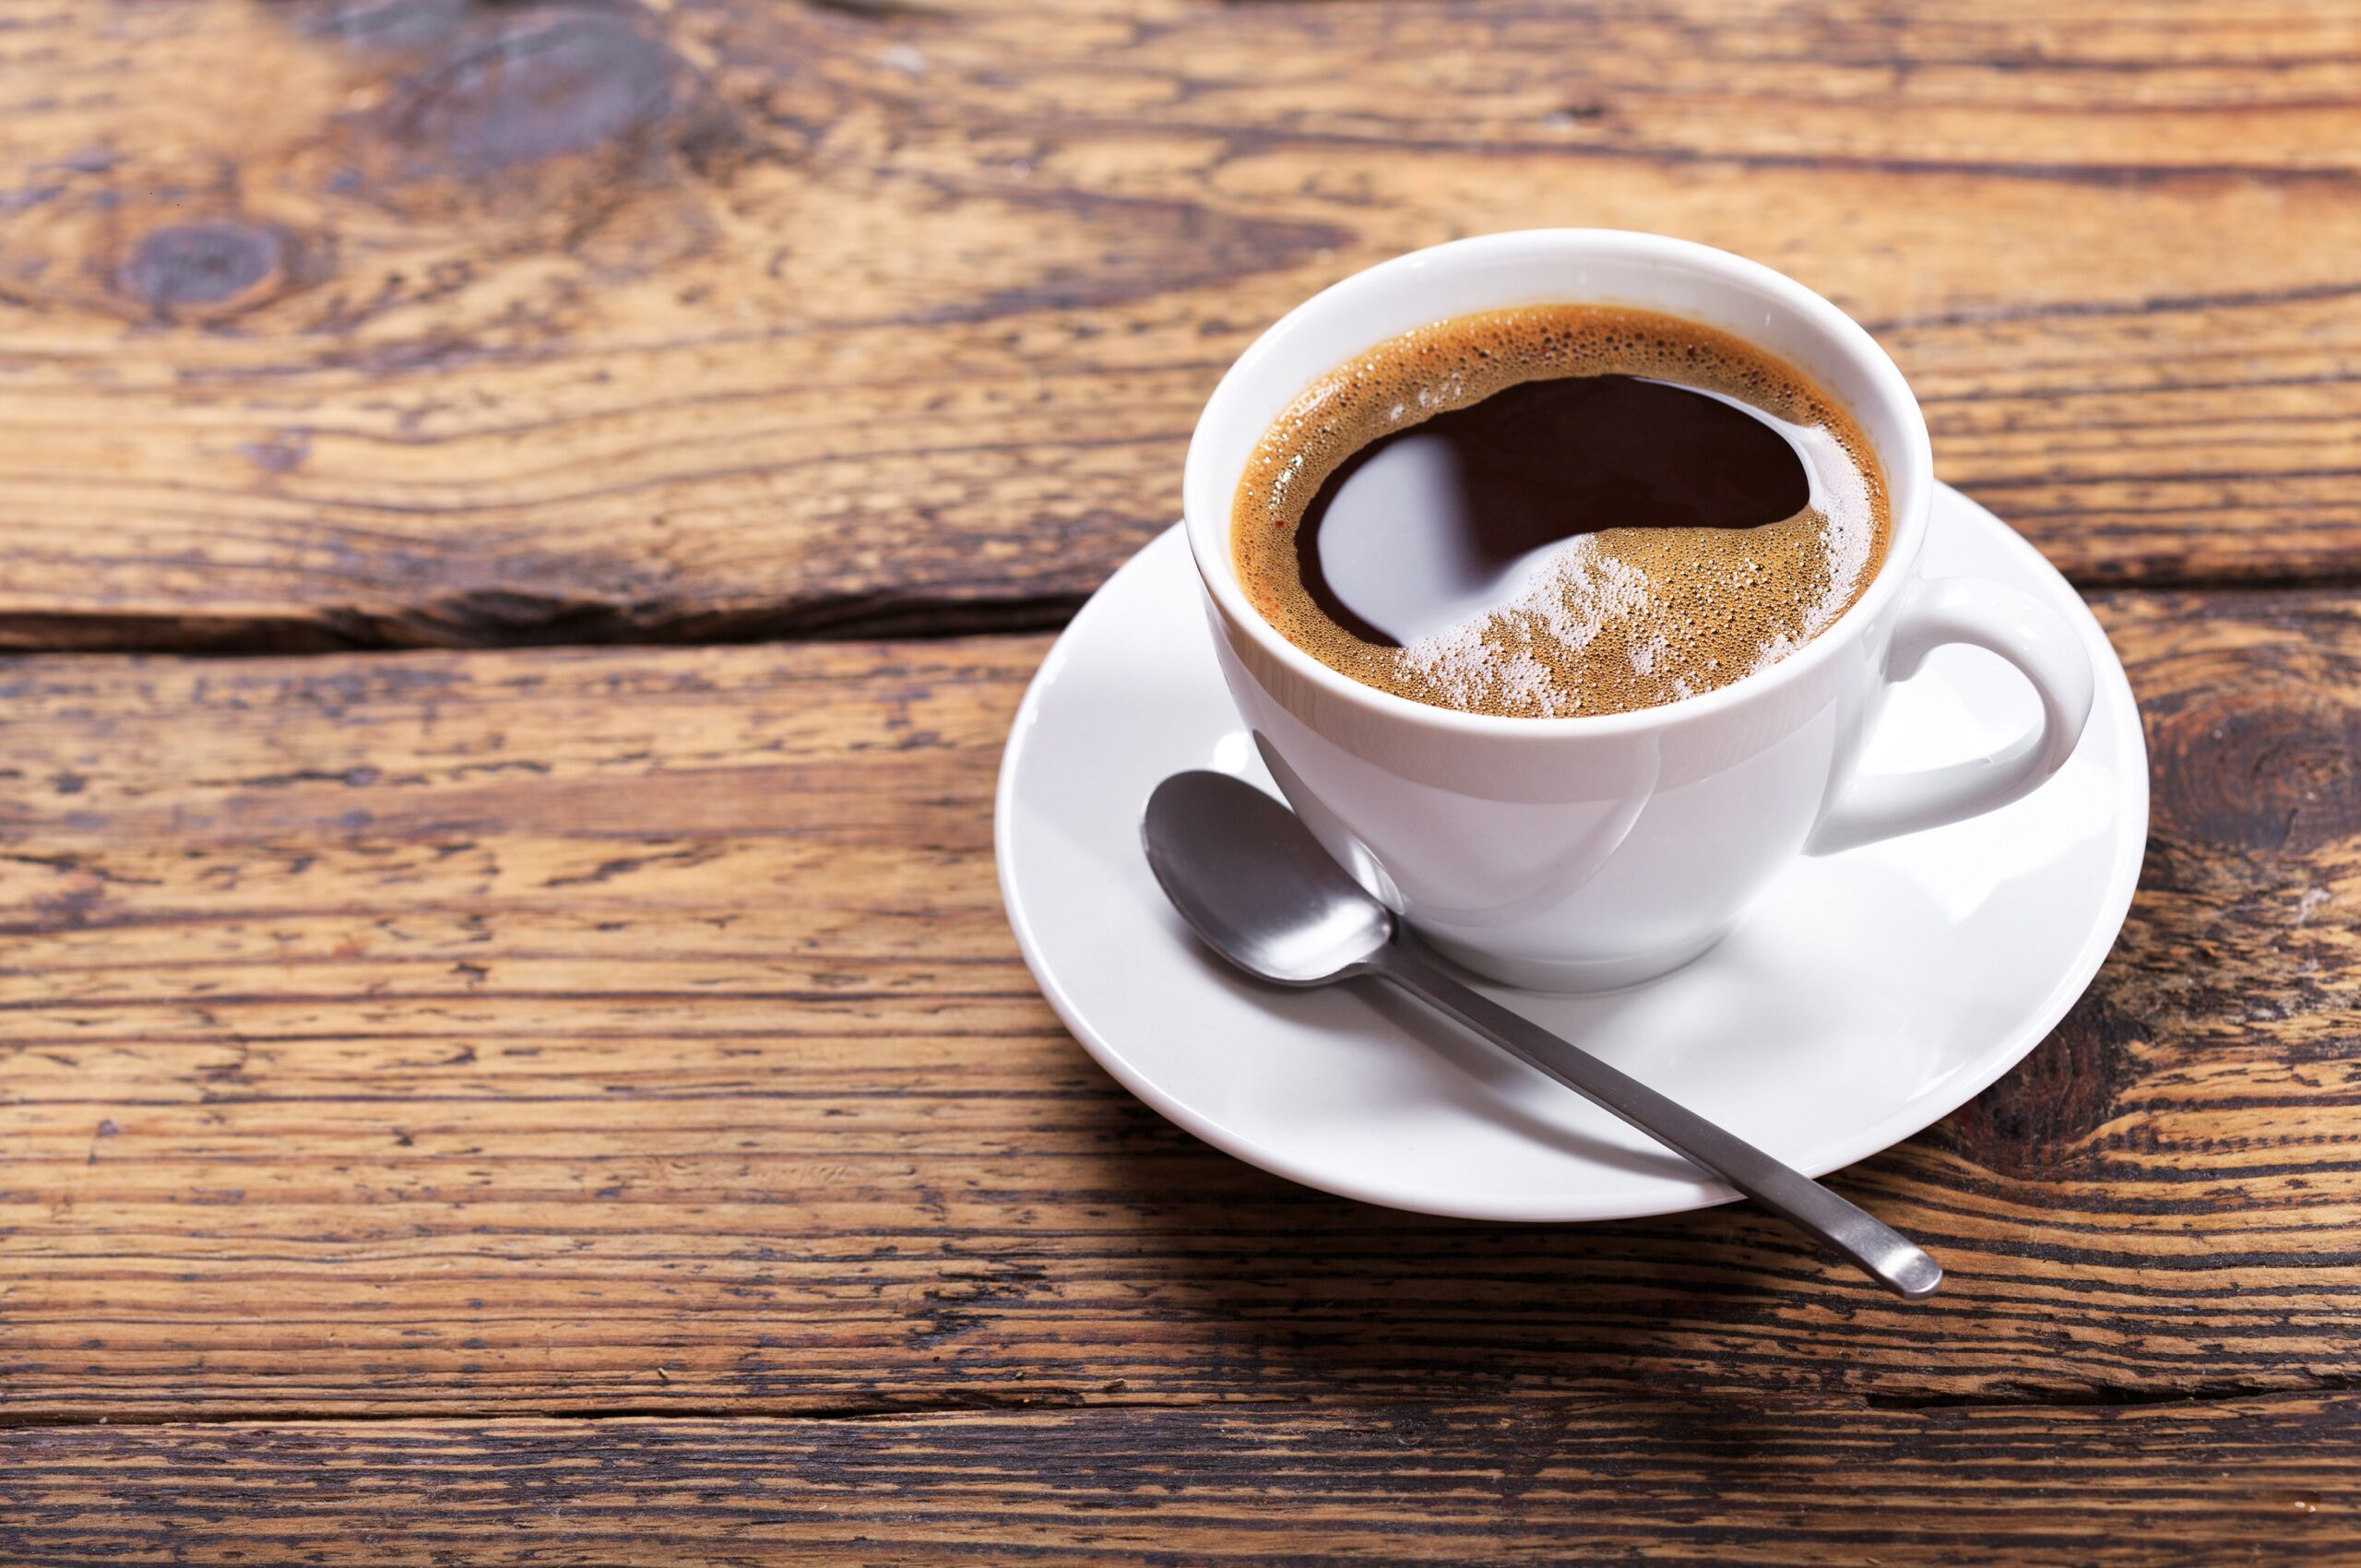 When is the best time to drink coffee?